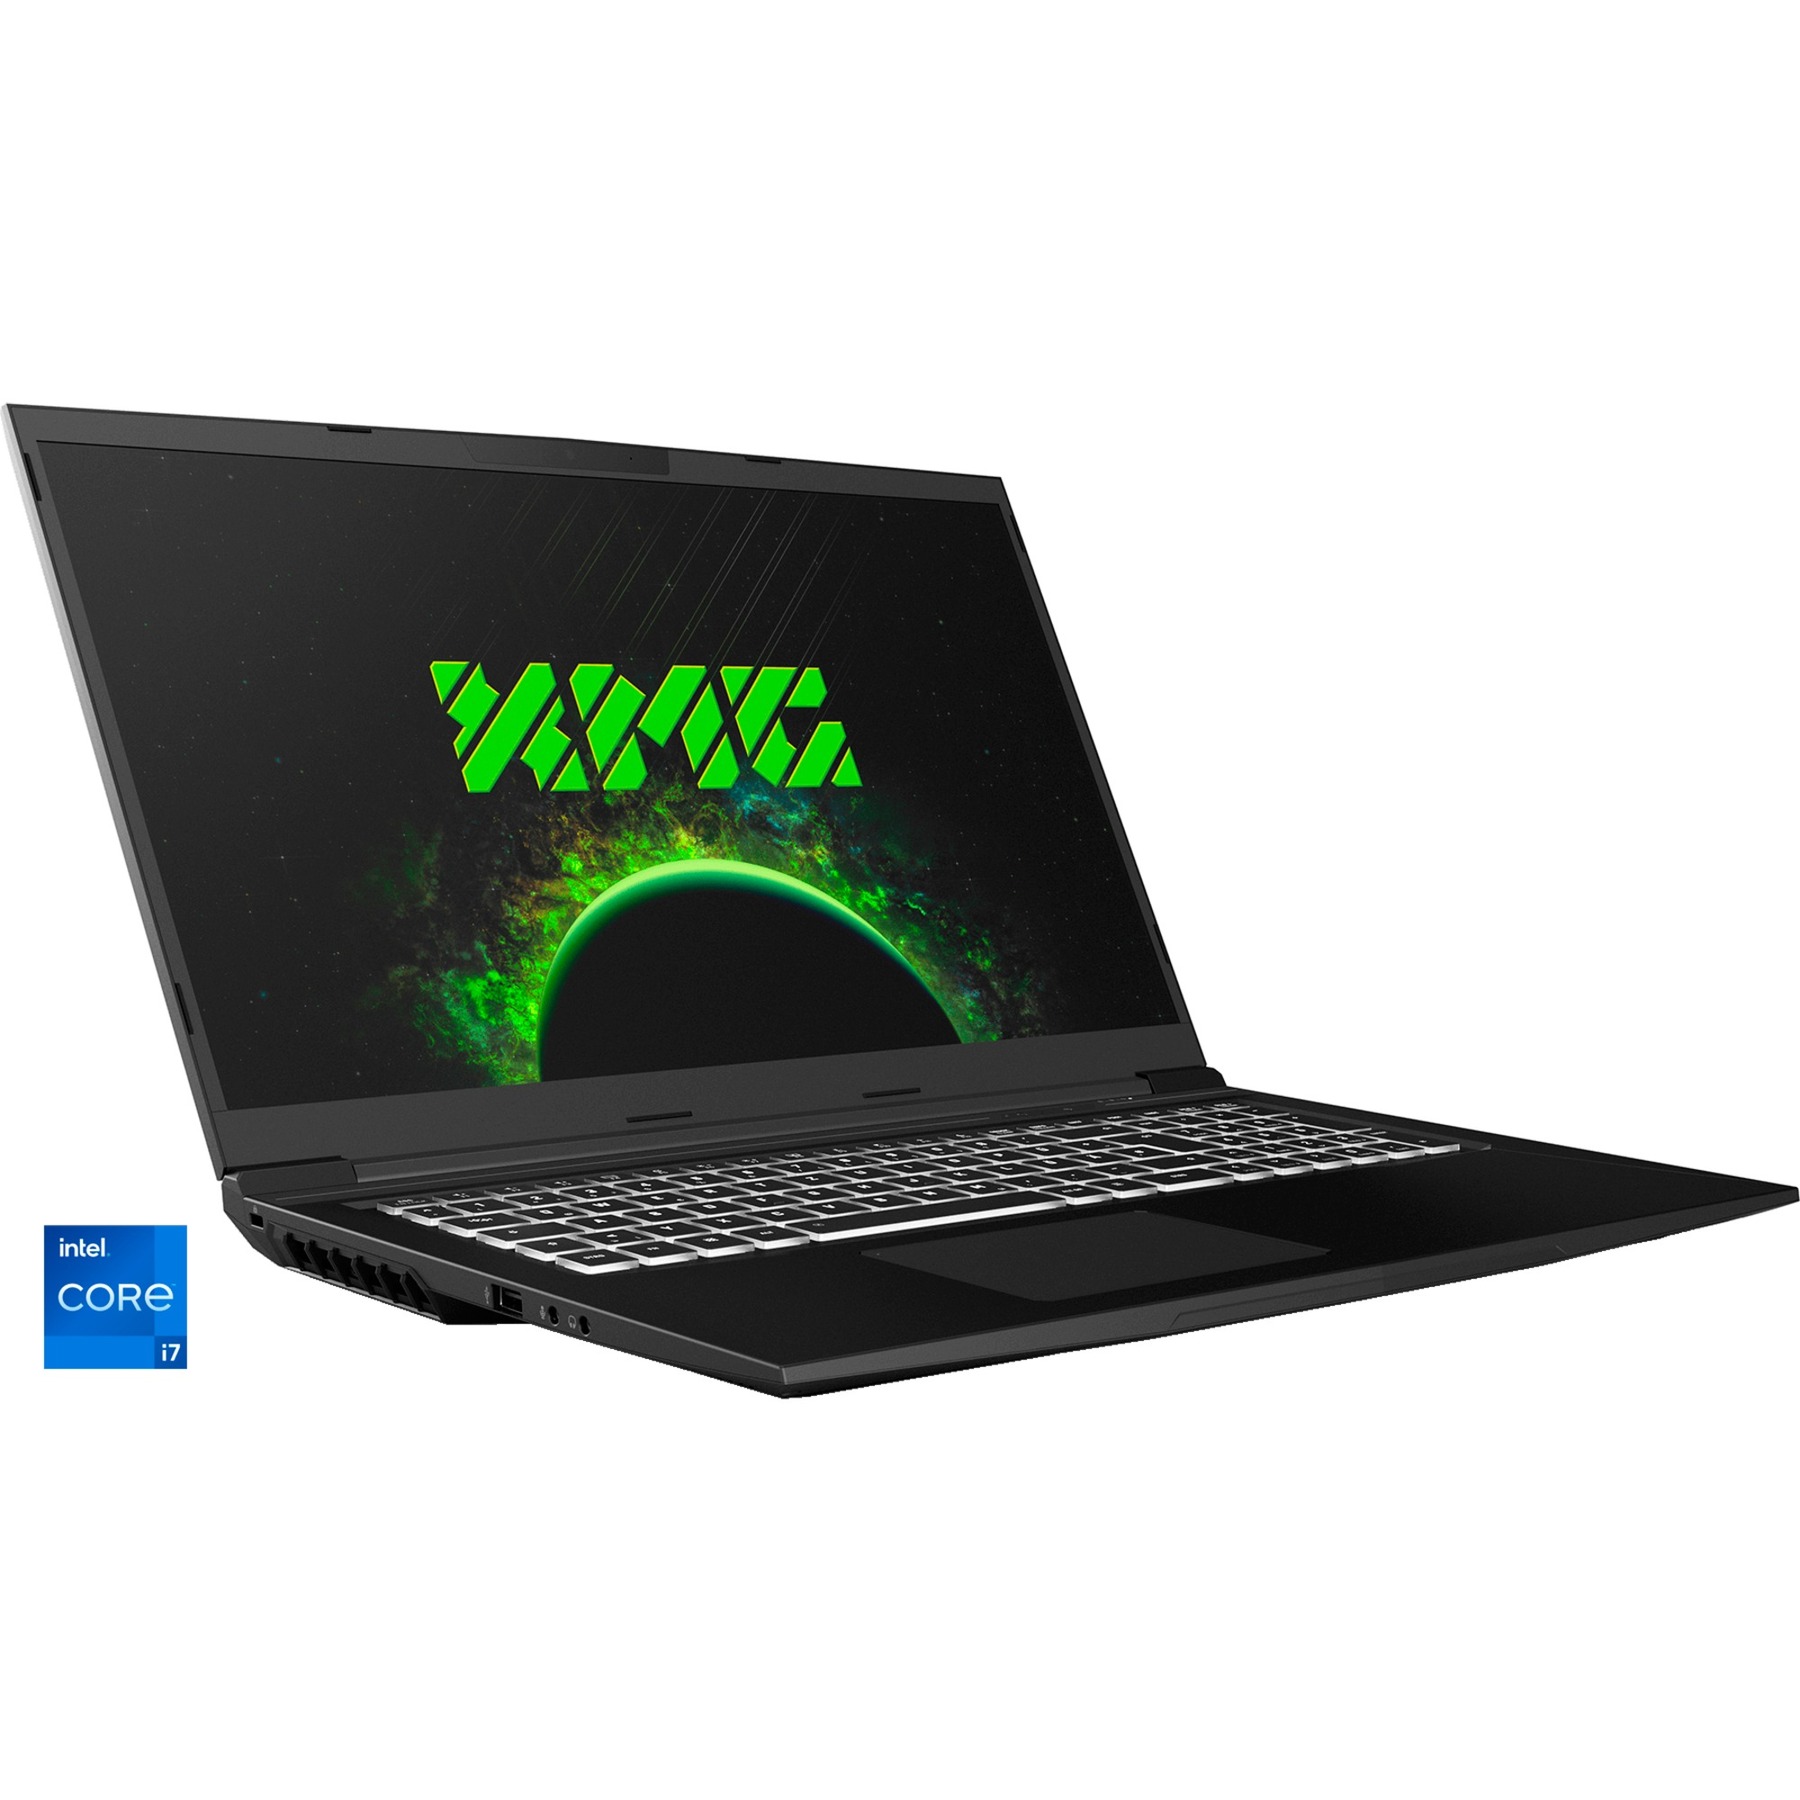 CORE 17 (10505856), Gaming-Notebook